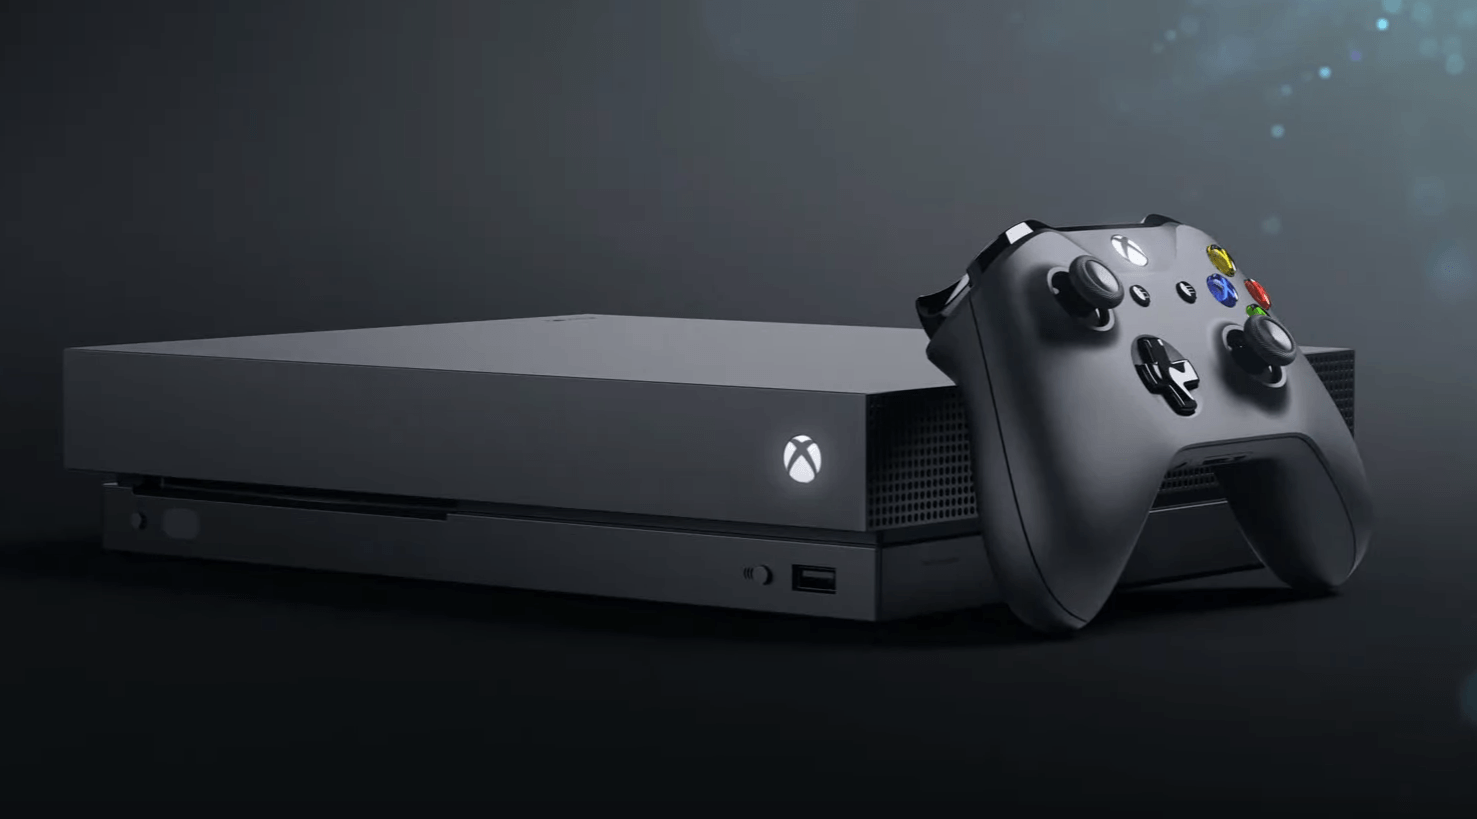 Ubisoft CEO Yves Guillemot Says That Xbox One X Will Help Grow